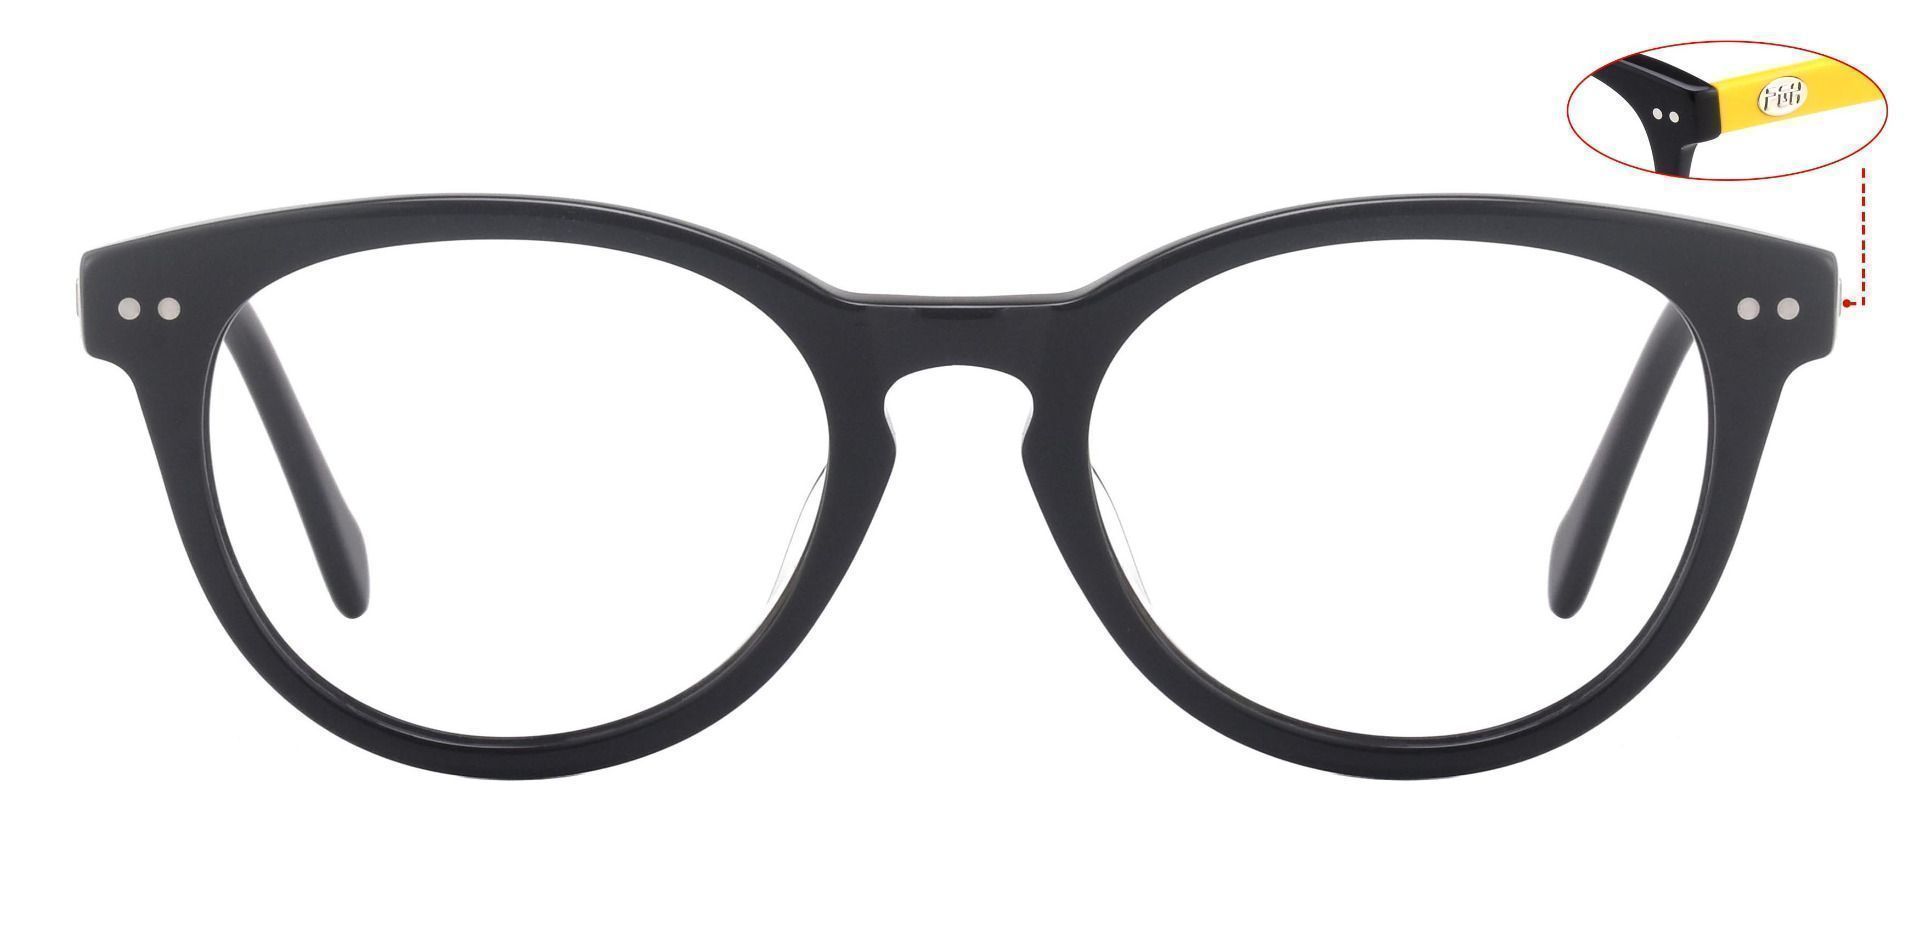 Forbes Oval Blue Light Blocking Glasses - The Frame Is Black And Gold